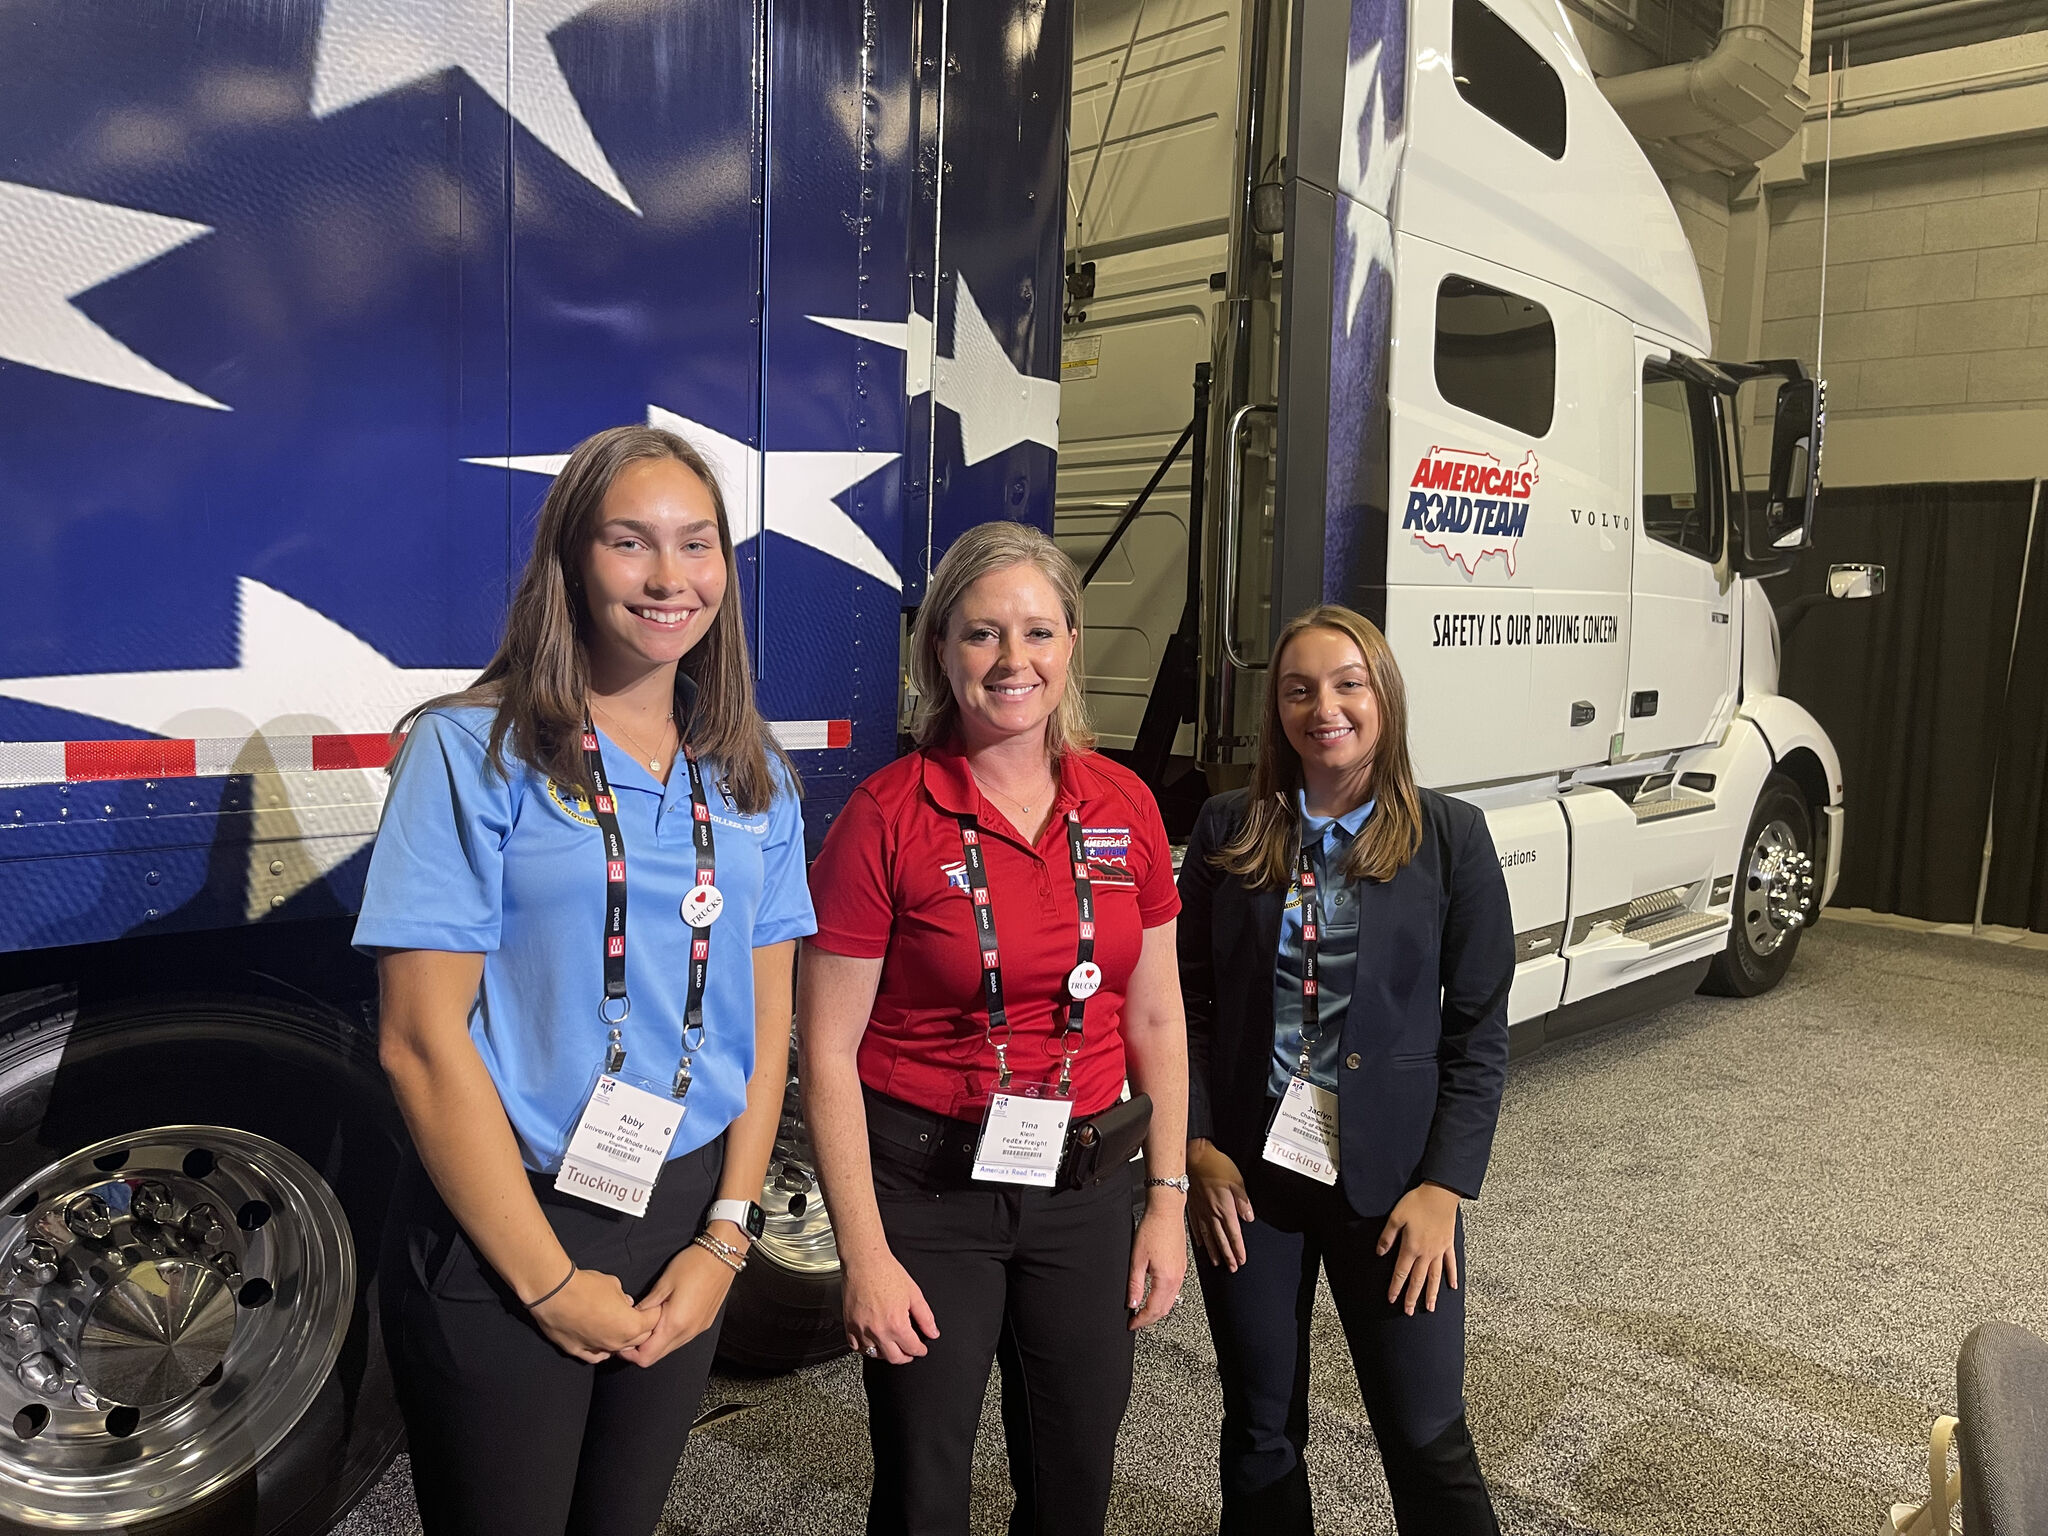 Trucking U Students with America's Road Team Captain